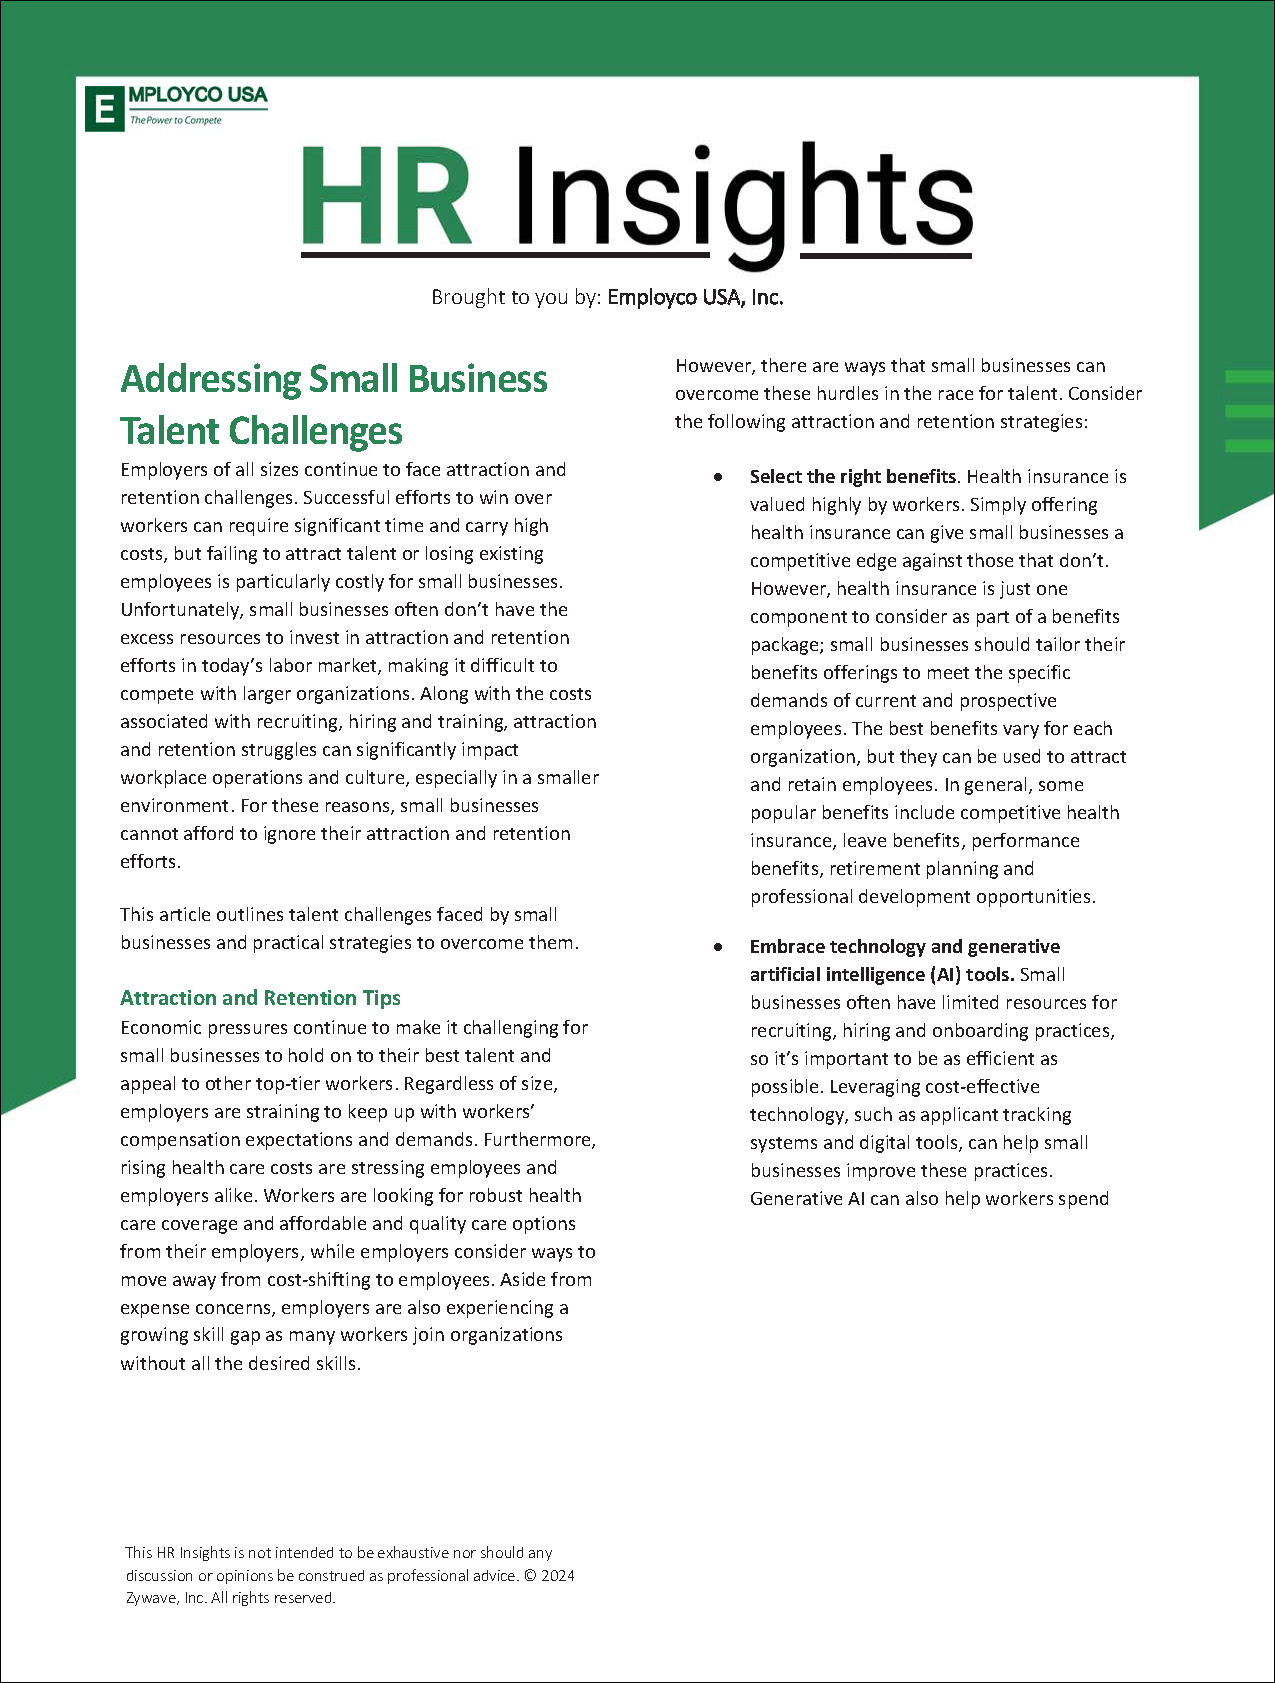 HR Insights: Addressing Small Business Talent Challenges